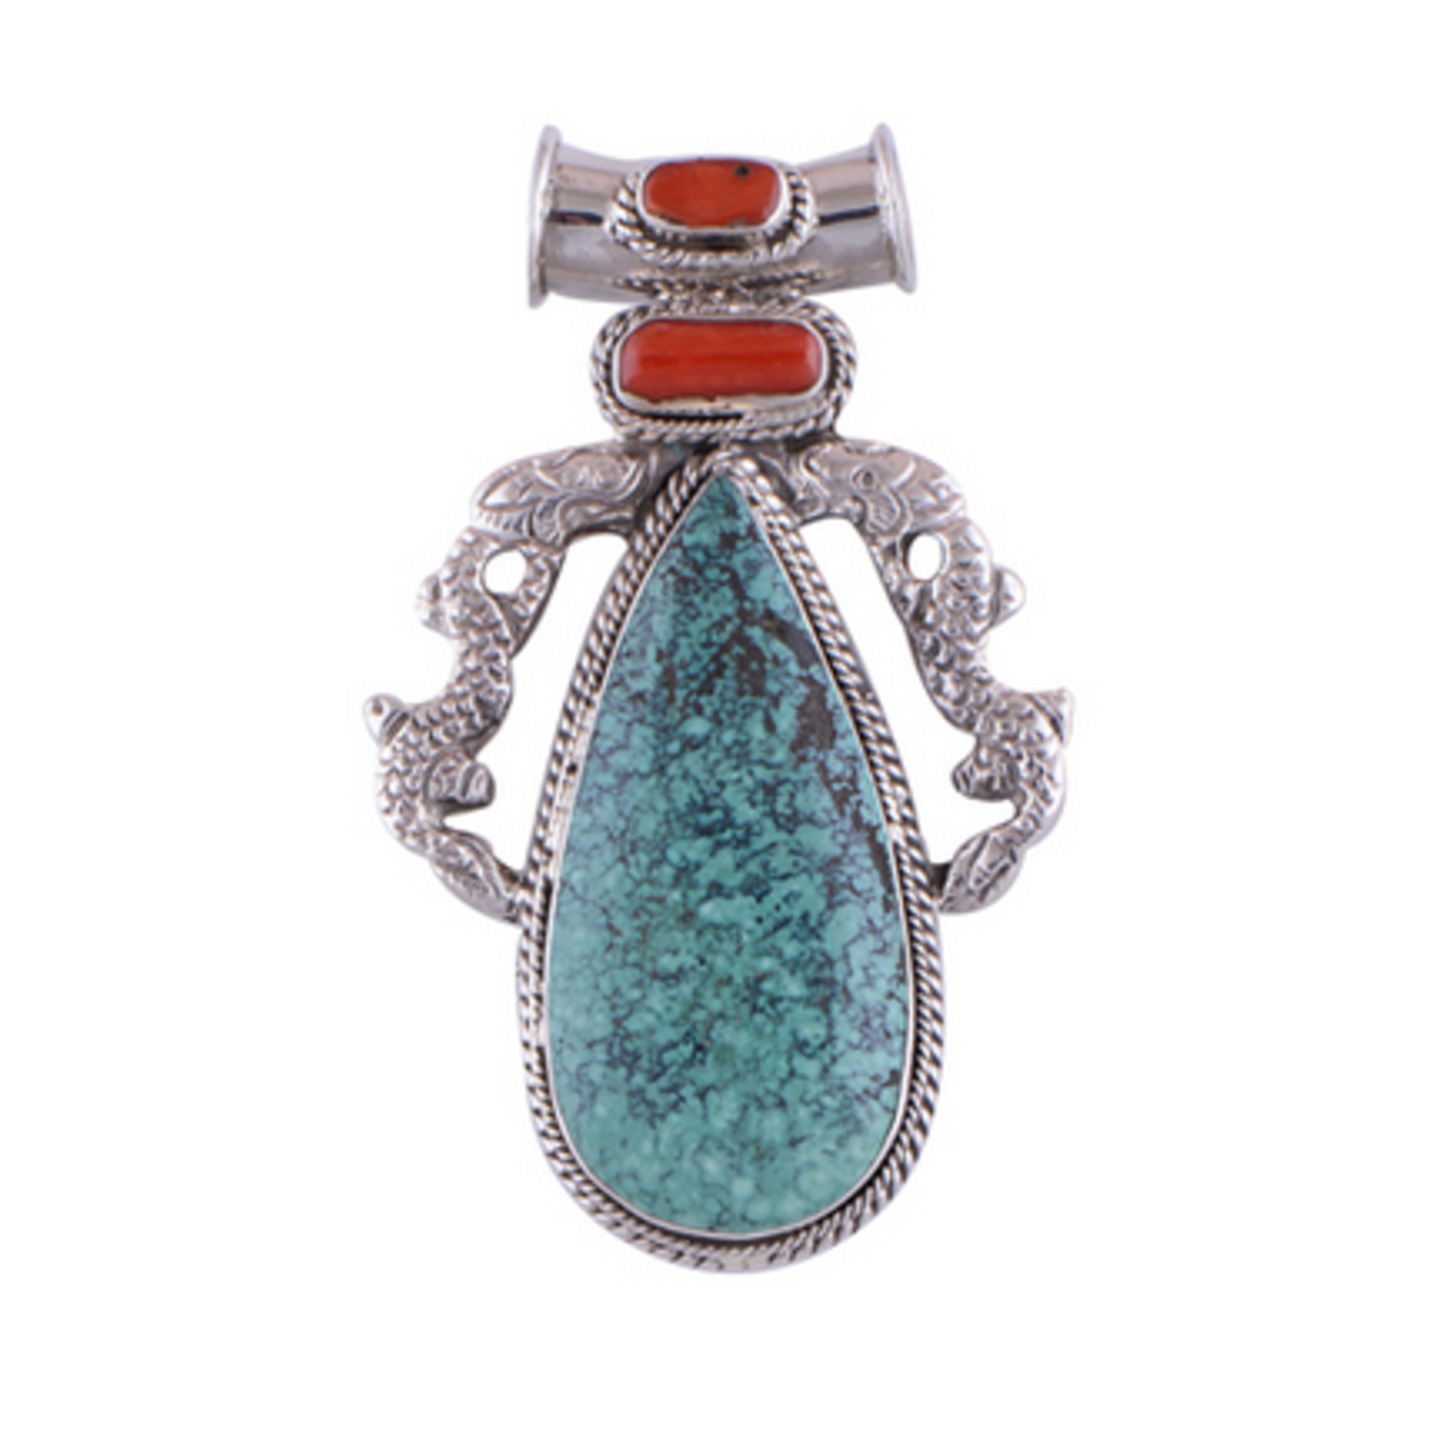 The Ancient Spell Turquoise & Coral Silver Pendant